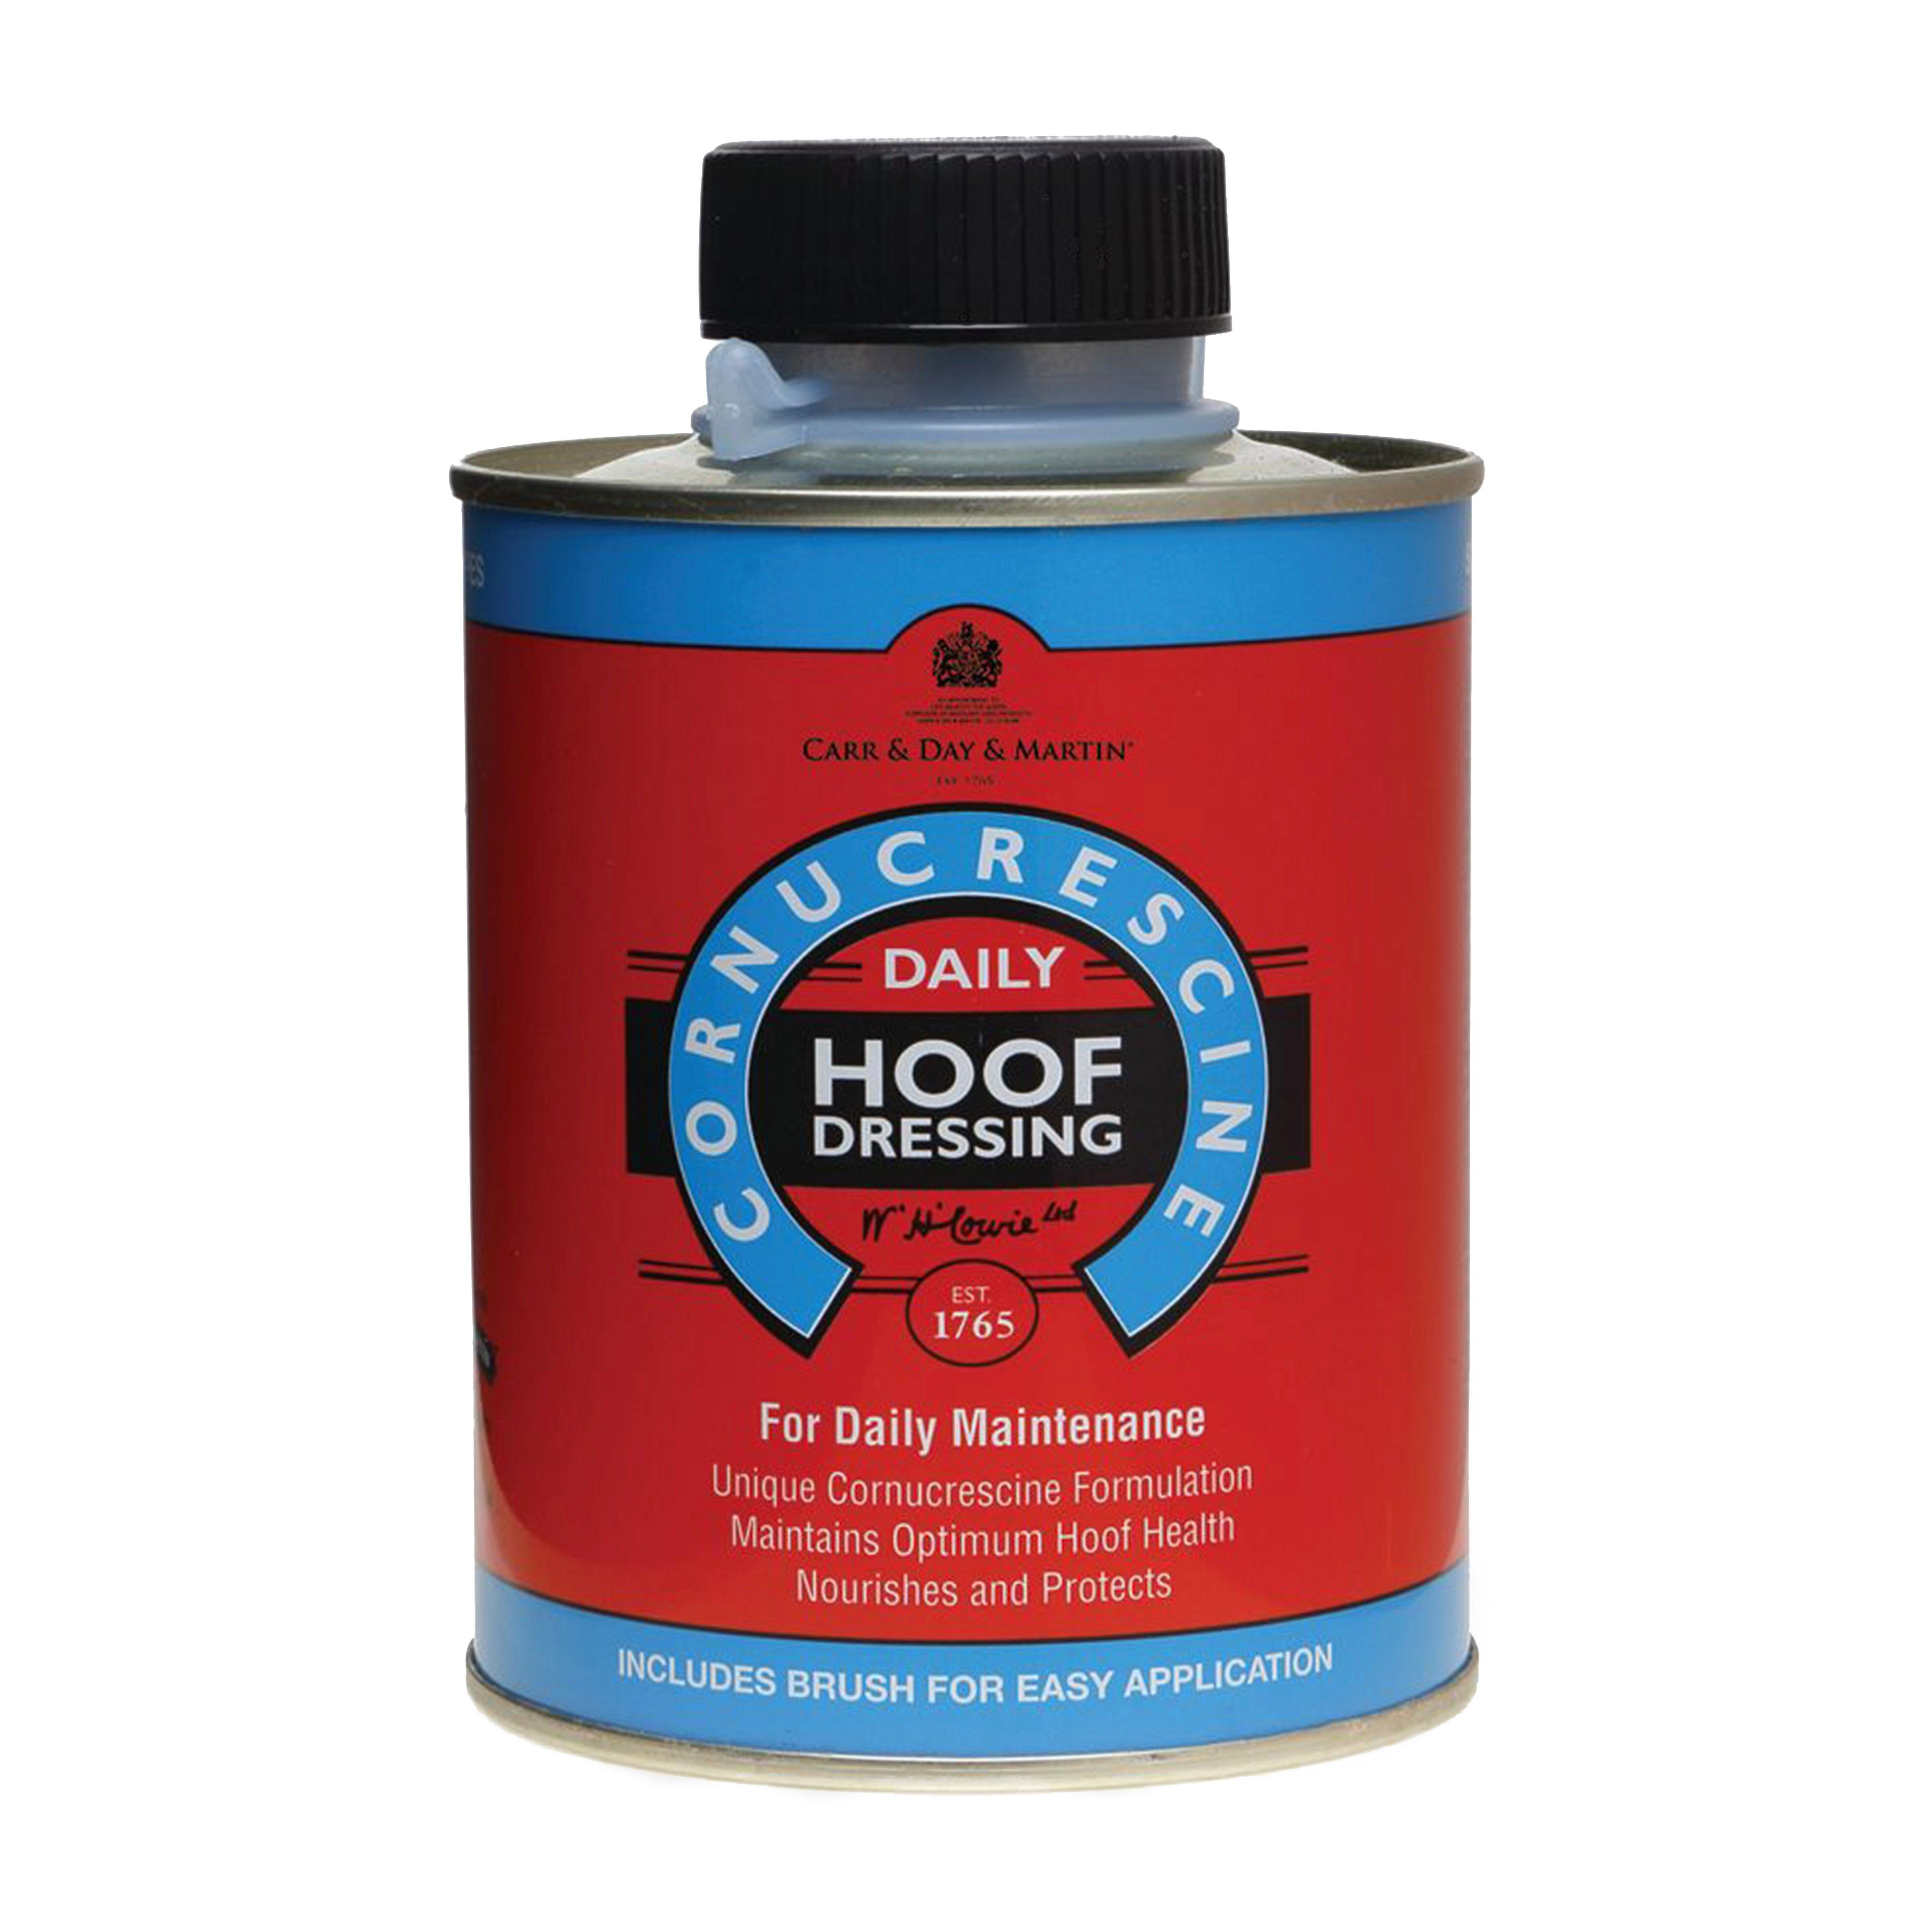 Carr and Day Corn Daily Hoof Dressing Review